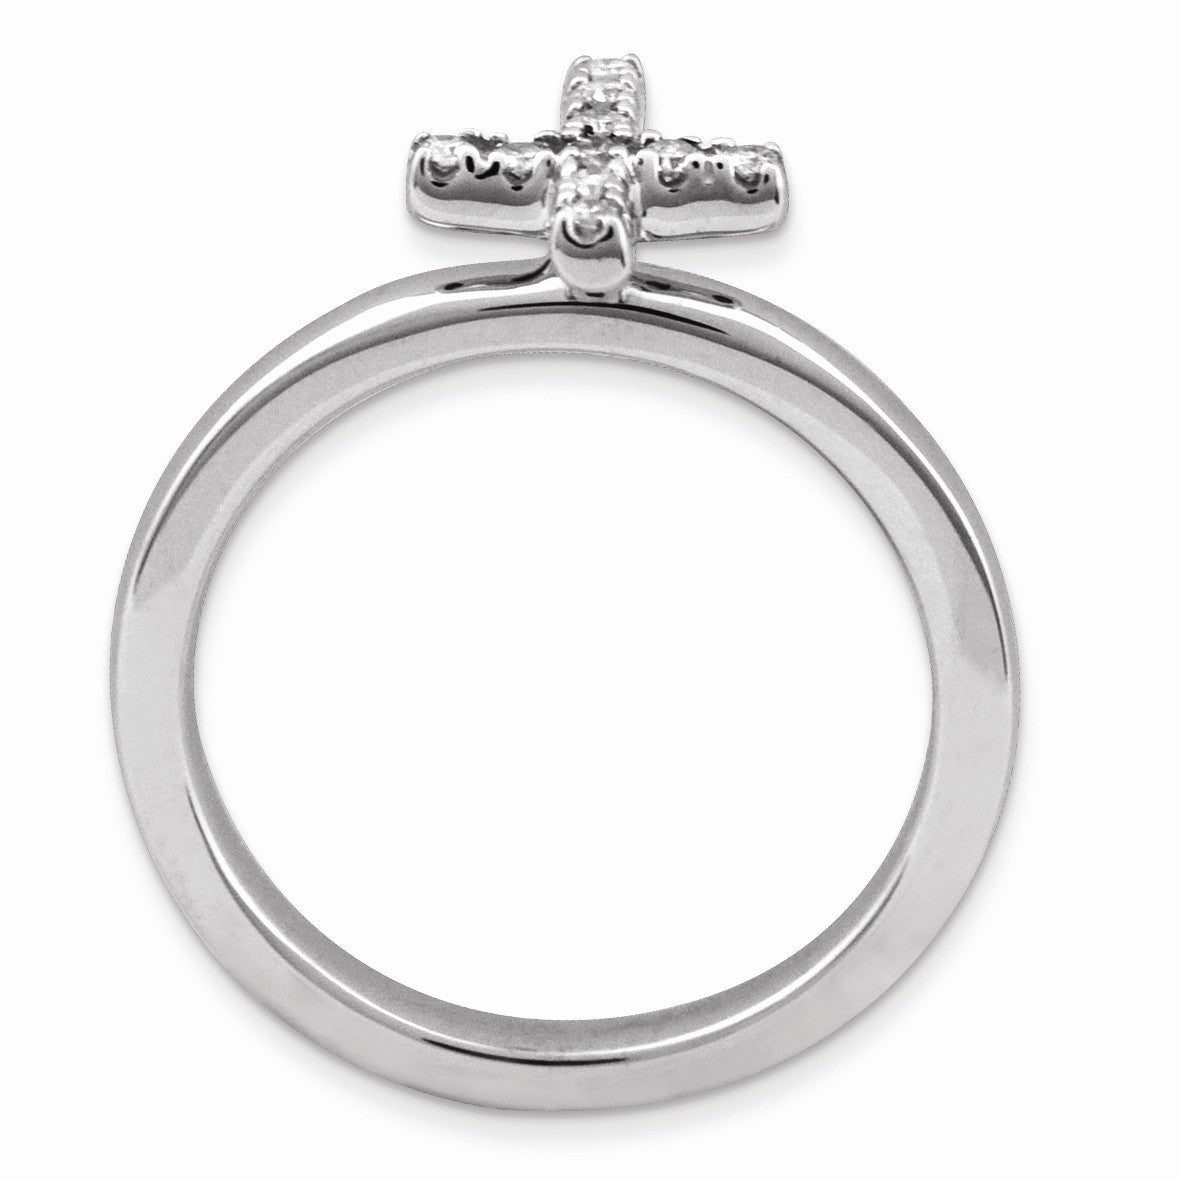 Alternate view of the Sterling Silver Stackable 1/10 Ctw HI/I3 Diamond 10mm Cross Ring by The Black Bow Jewelry Co.